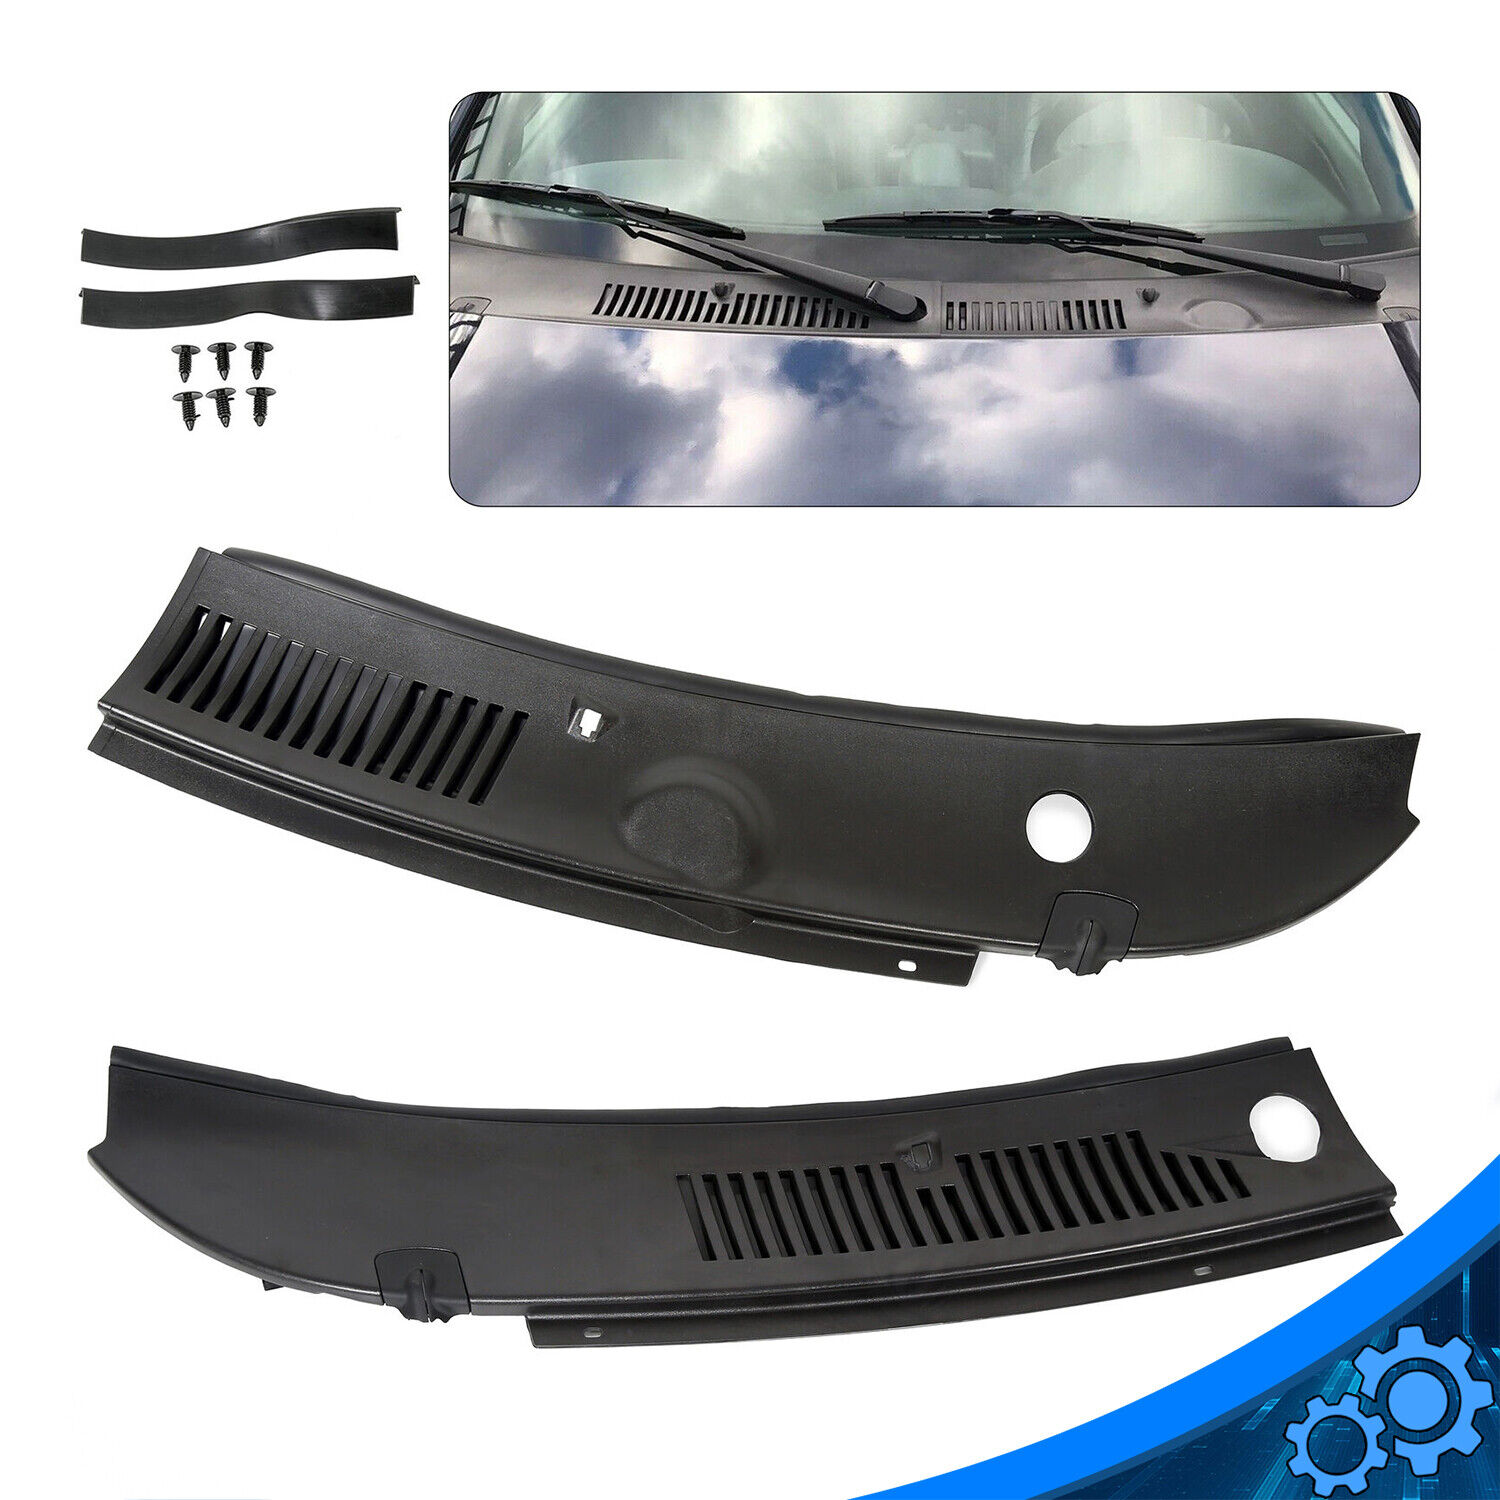 Windshield Improved Wiper Cowl Vent Grille Panel Hood Fits Ford Mustang 99-04